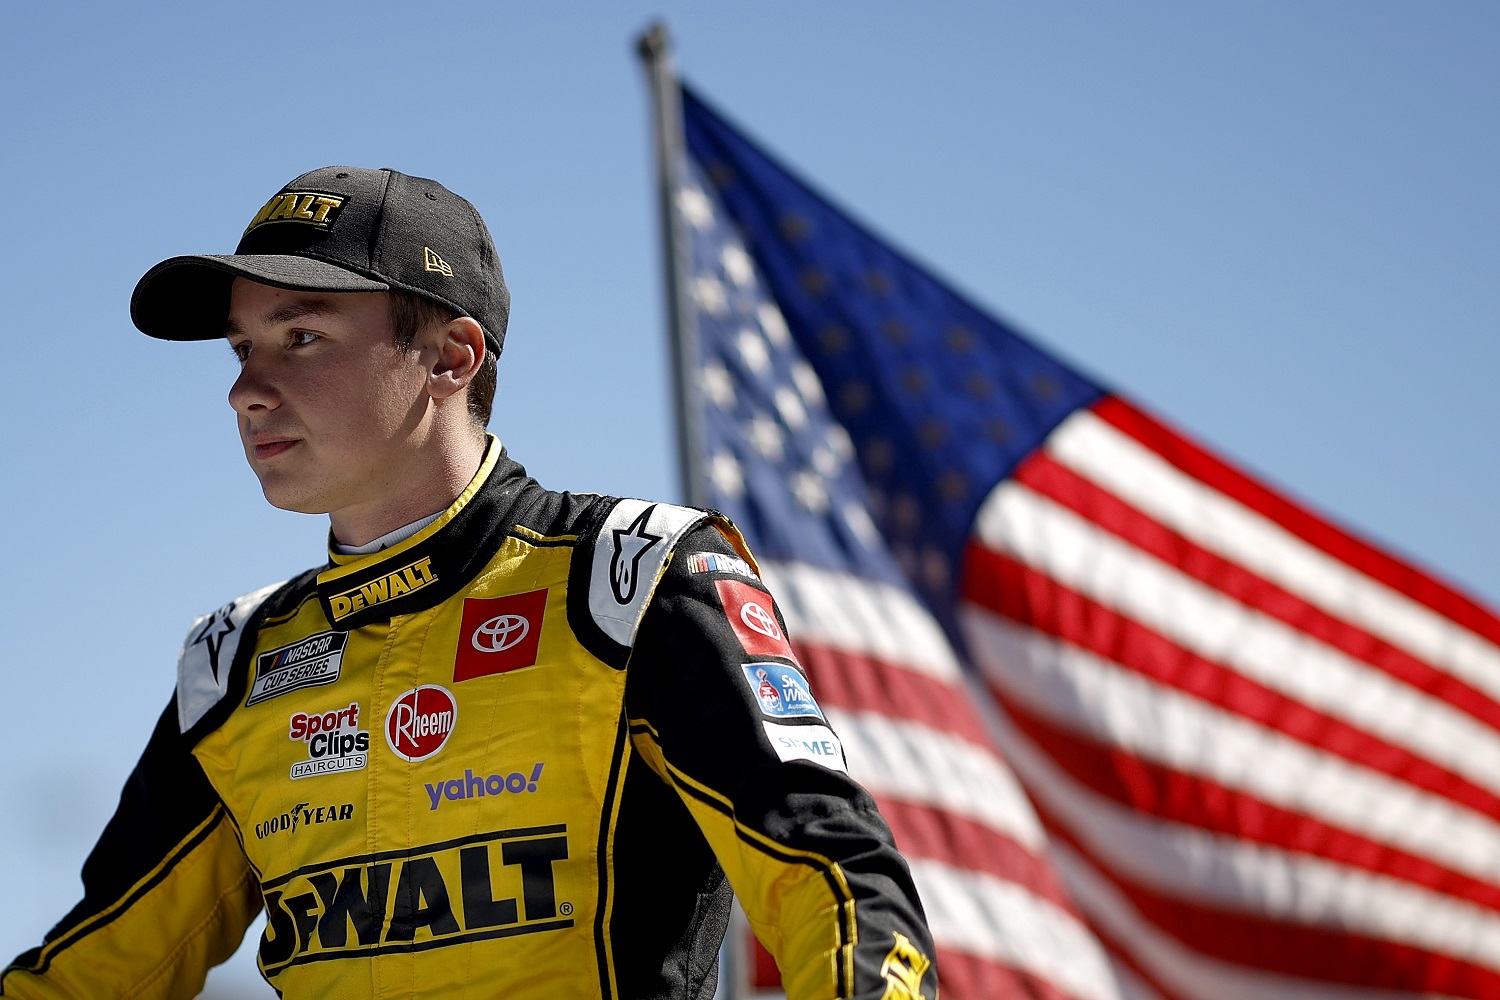 Christopher Bell makes his parade lap during pre-race ceremonies for the NASCAR Cup Series Championship at Phoenix Raceway on Nov. 6, 2022. | Chris Graythen/Getty Images